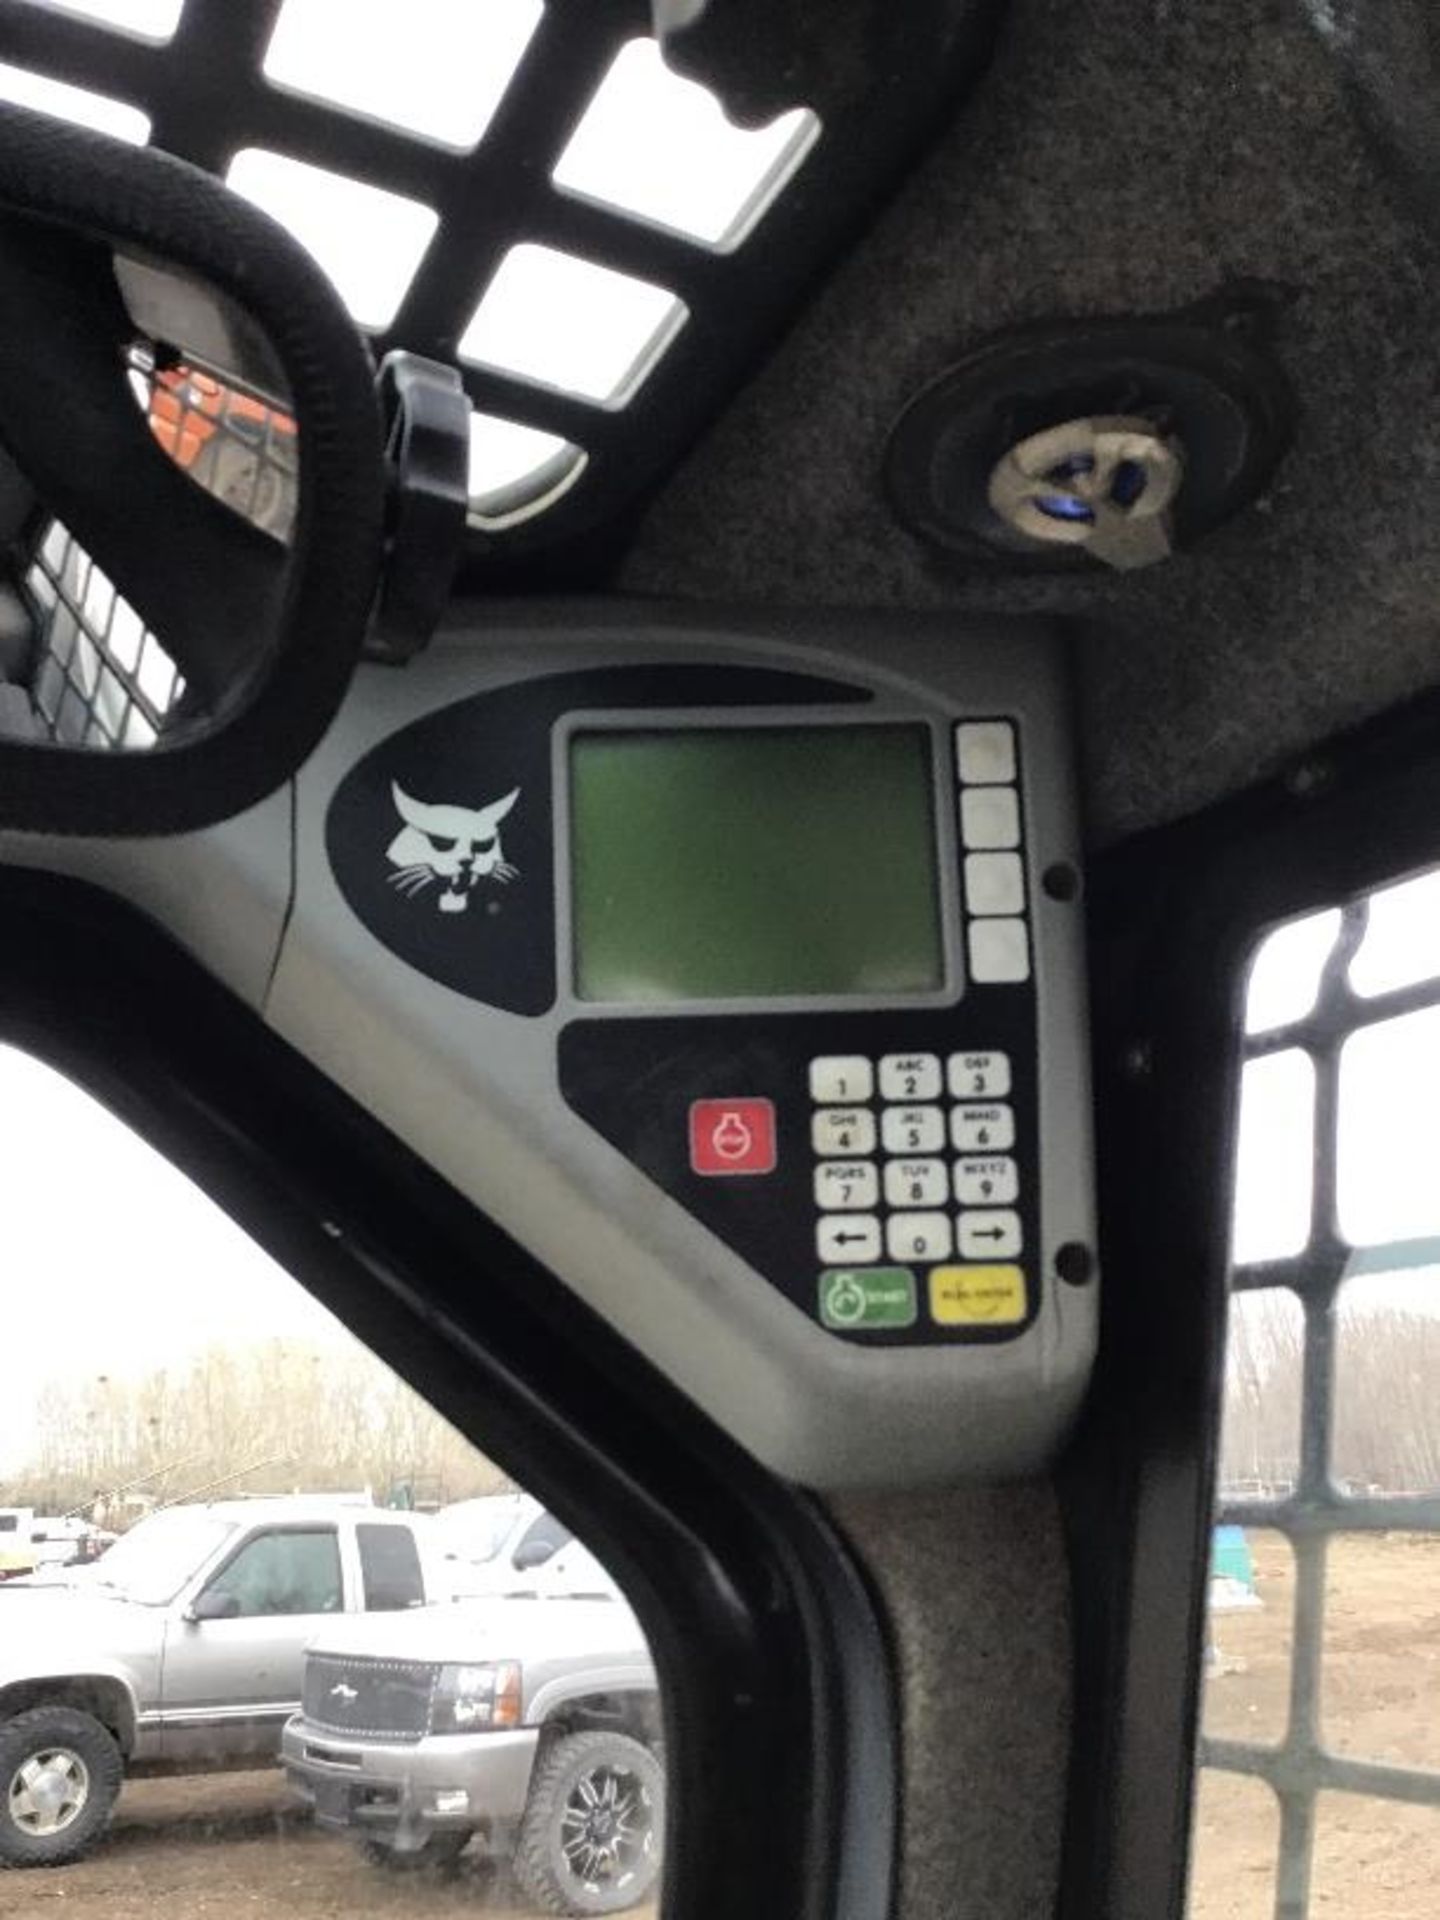 2008 Bobcat T320 Skidsteer +/-3000hrs s/n A7MP60323 +/-3000hrs s/n A7MP60323 - Image 7 of 13